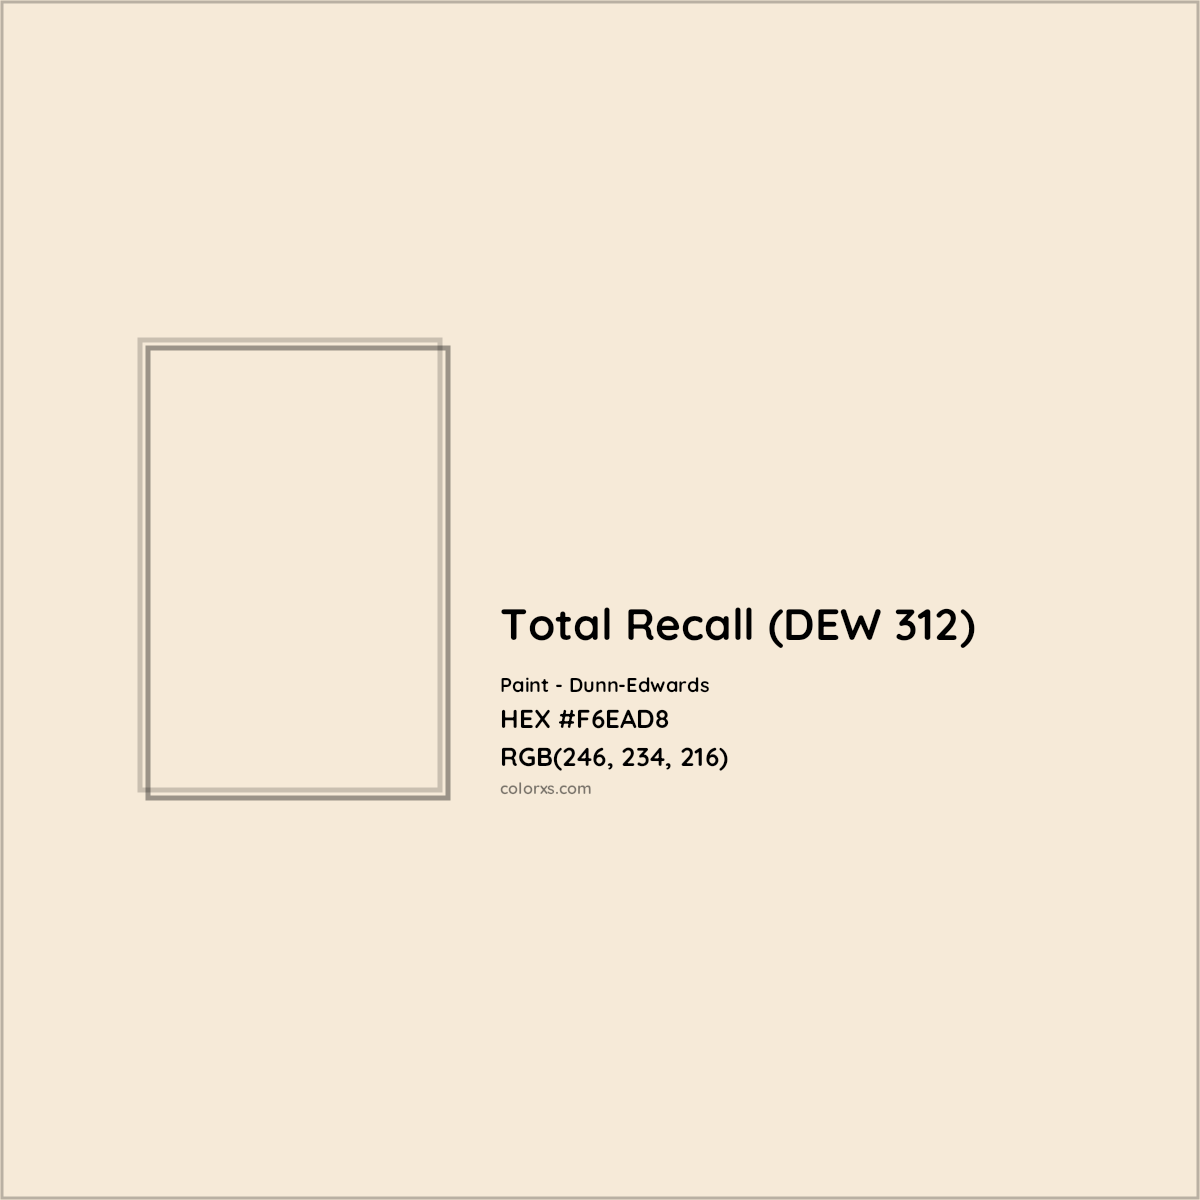 HEX #F6EAD8 Total Recall (DEW 312) Paint Dunn-Edwards - Color Code